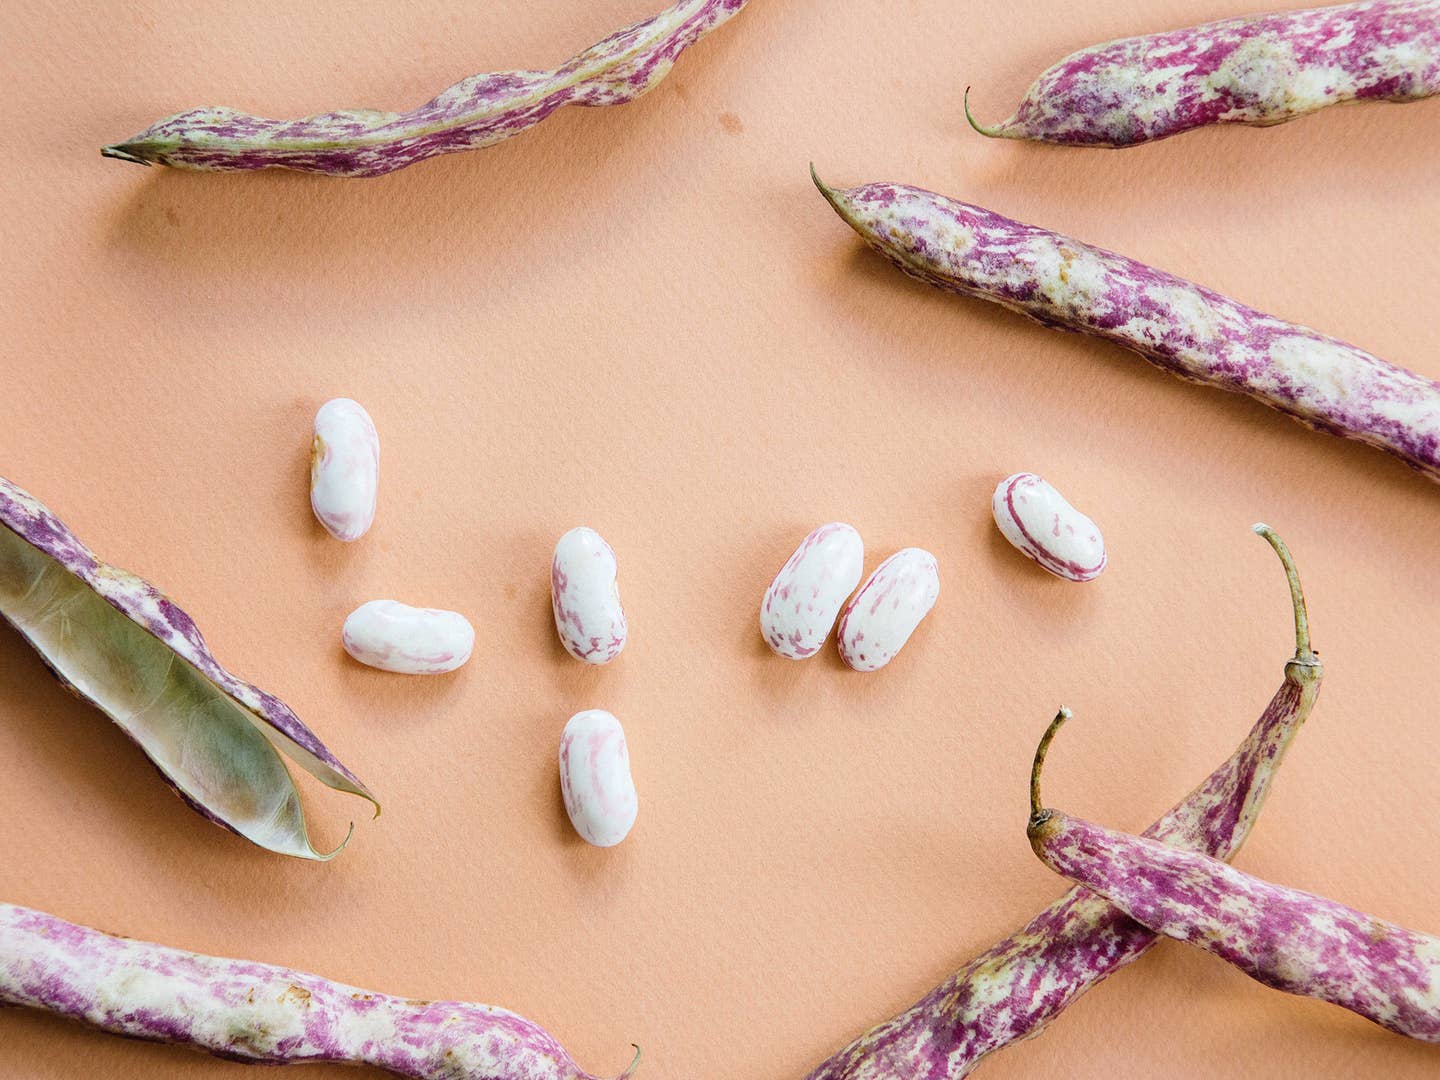 Fresh Shelling Beans are Summer’s Most Underrated Produce